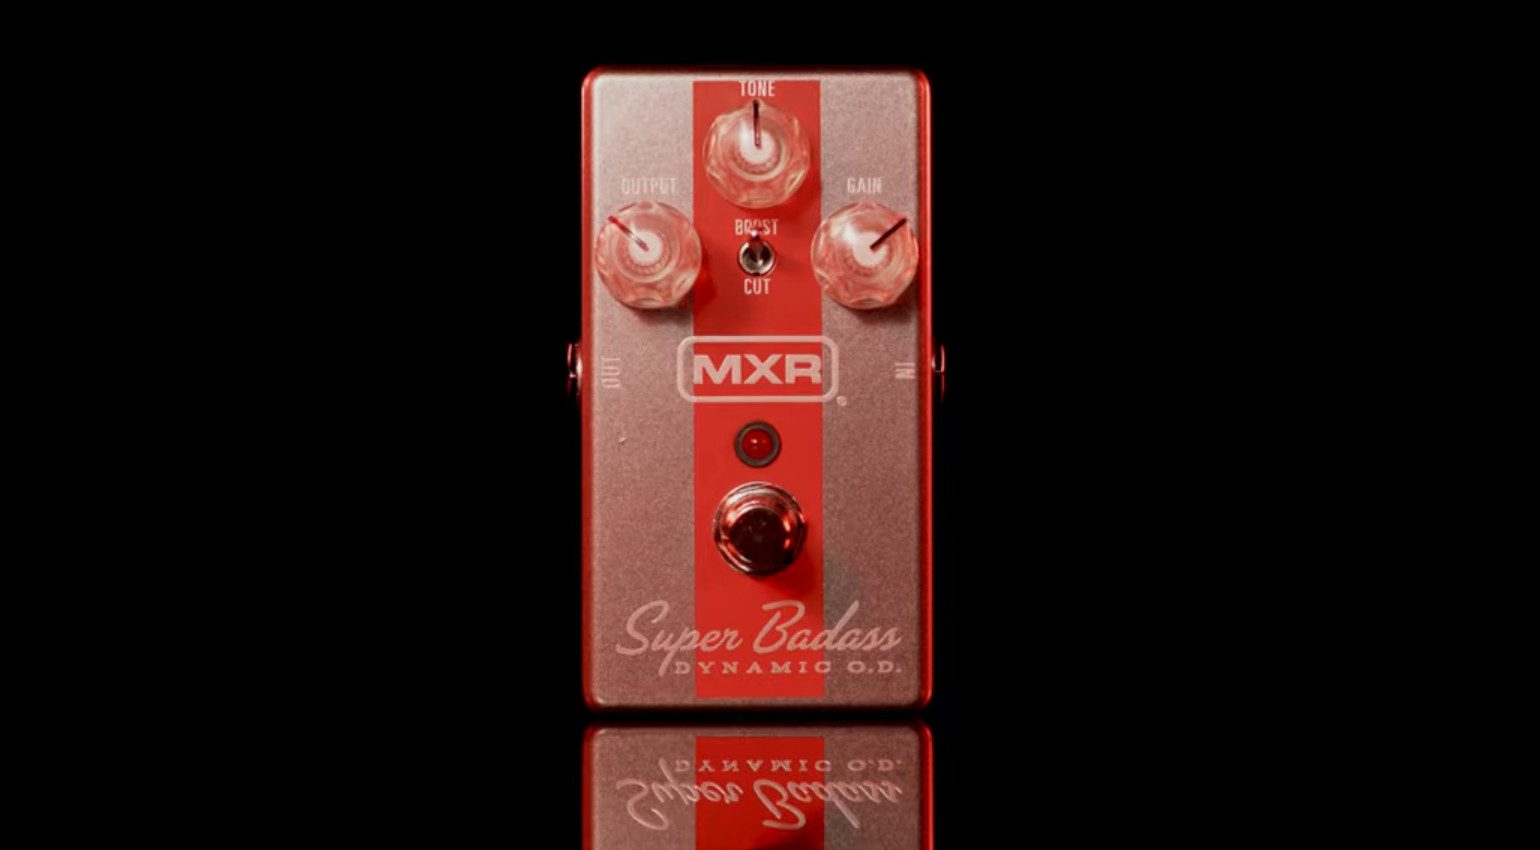 MXR Super Badass Dynamic OD: Could this replace your Fulltone OCD 